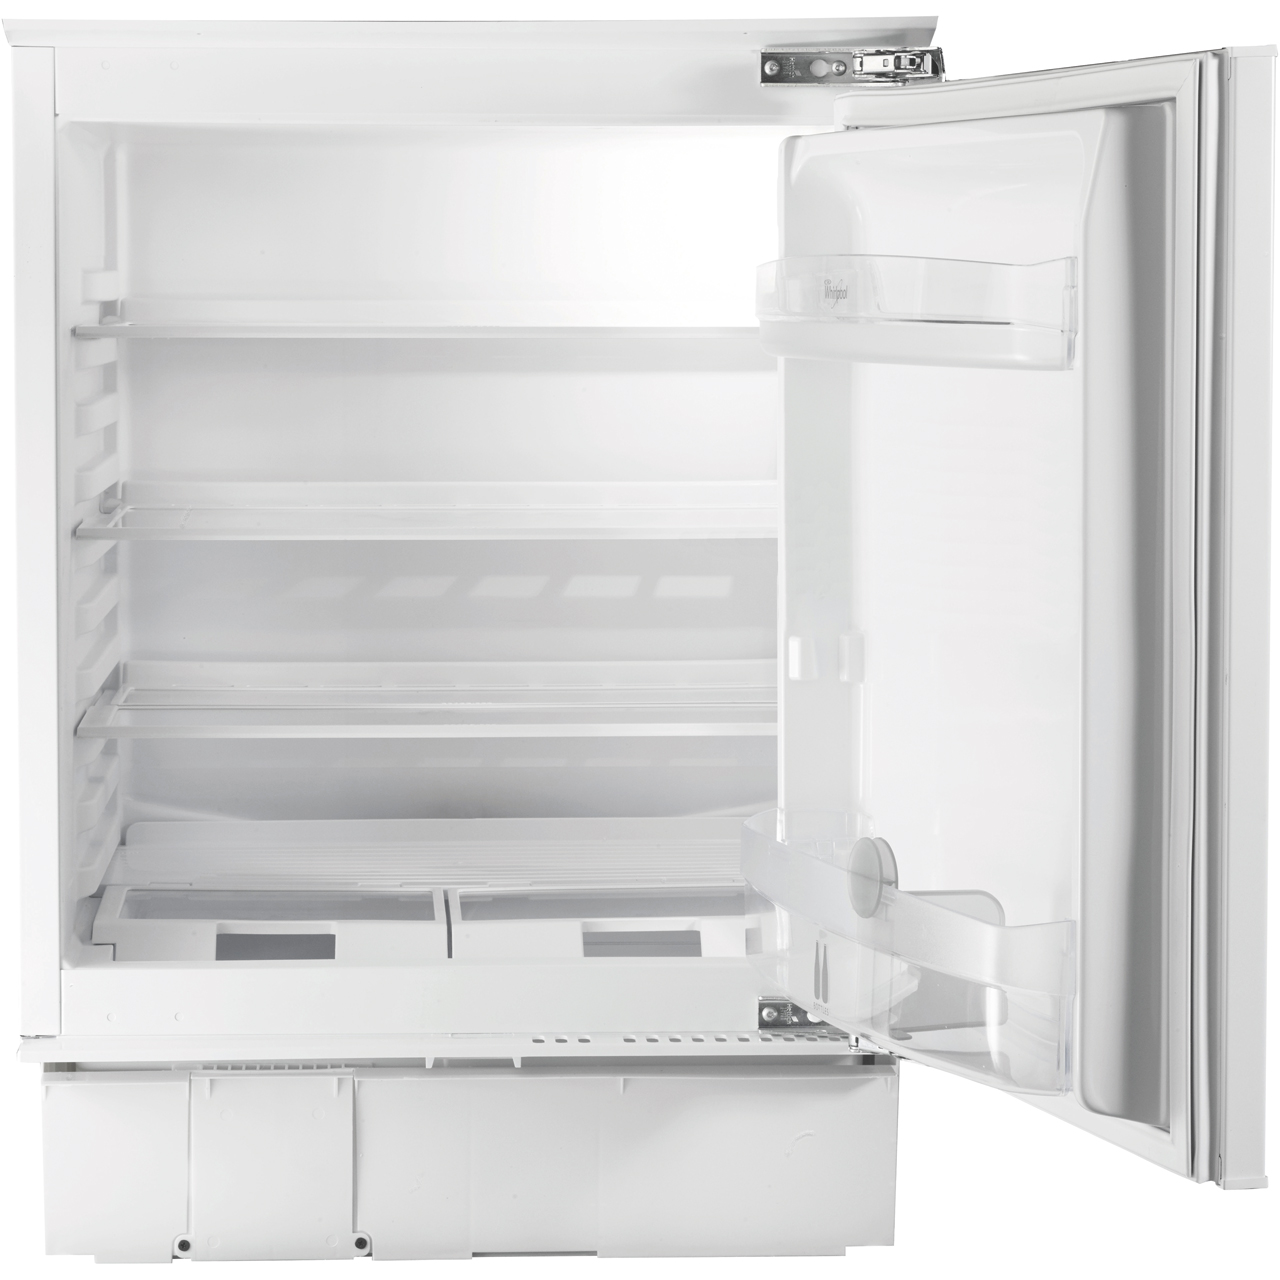 Whirlpool ARG146/A+/LA.1 Integrated Under Counter Fridge Review